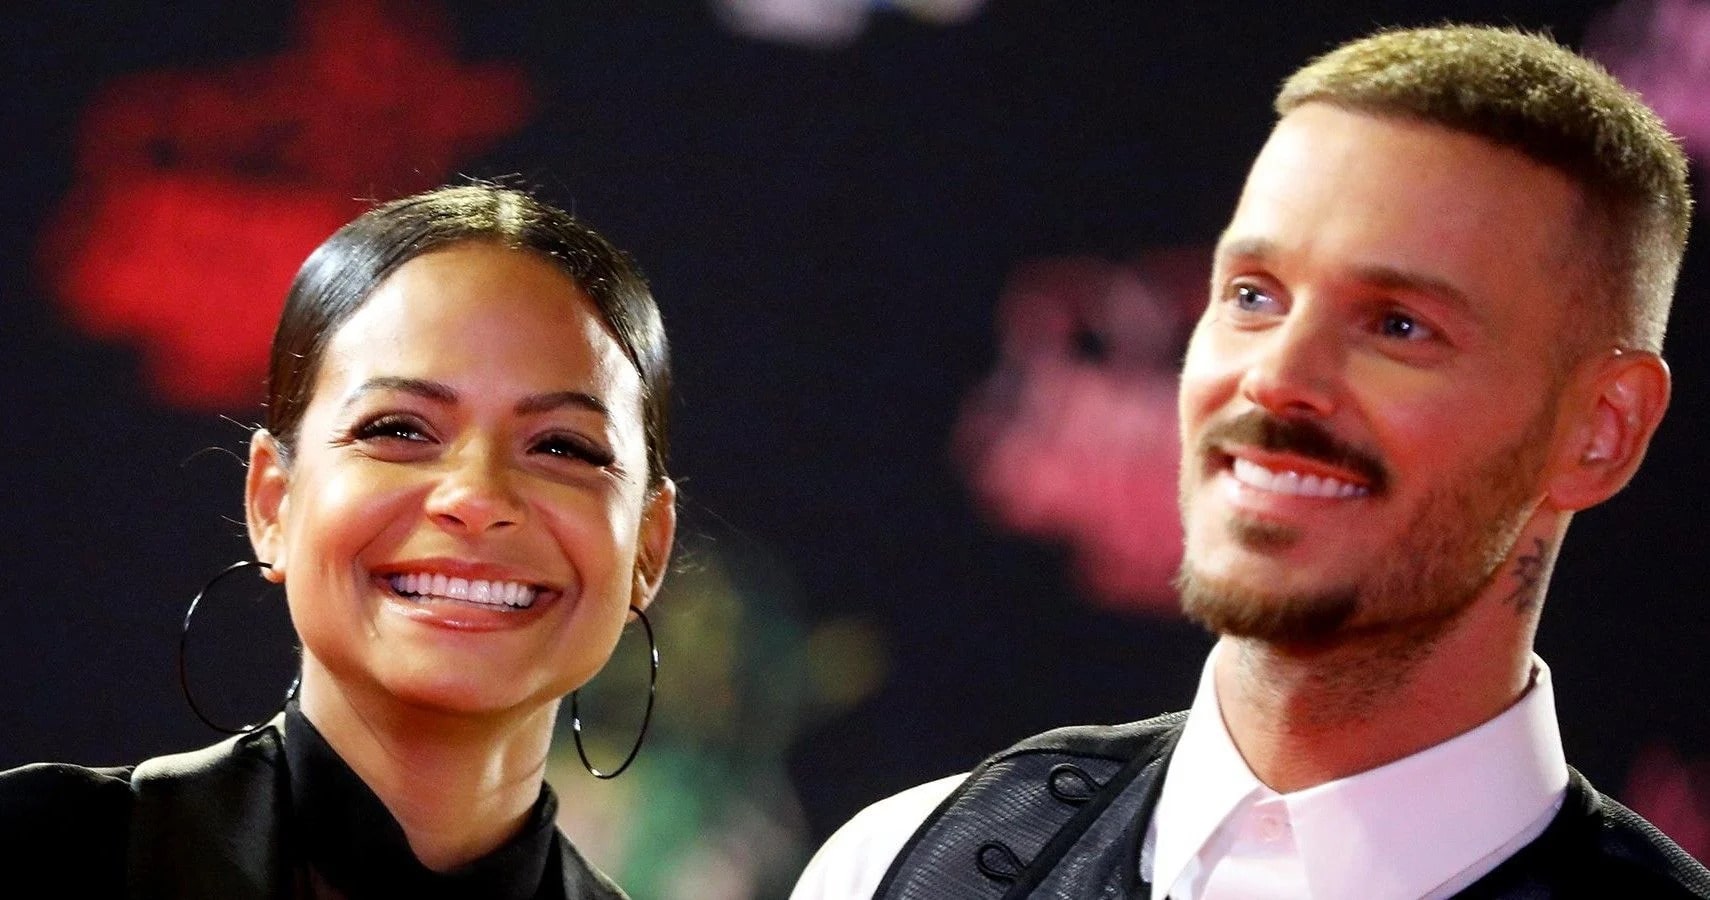 M. Pokora in a white shirt with his wife in a black dress.